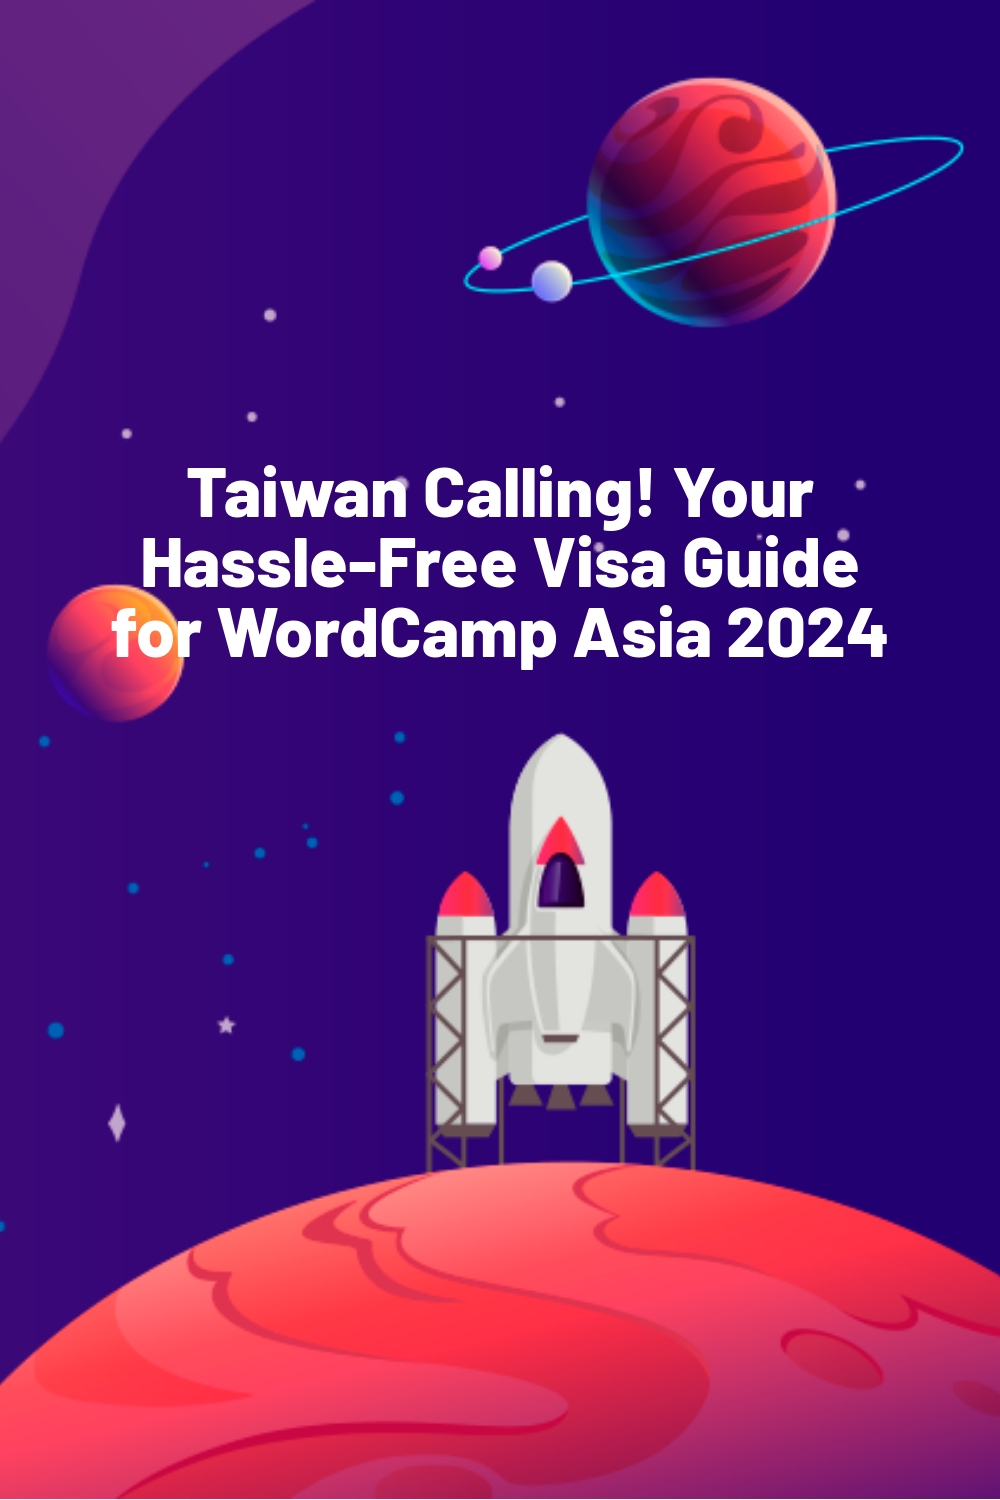 Taiwan Calling! Your Hassle-Free Visa Guide for WordCamp Asia 2024